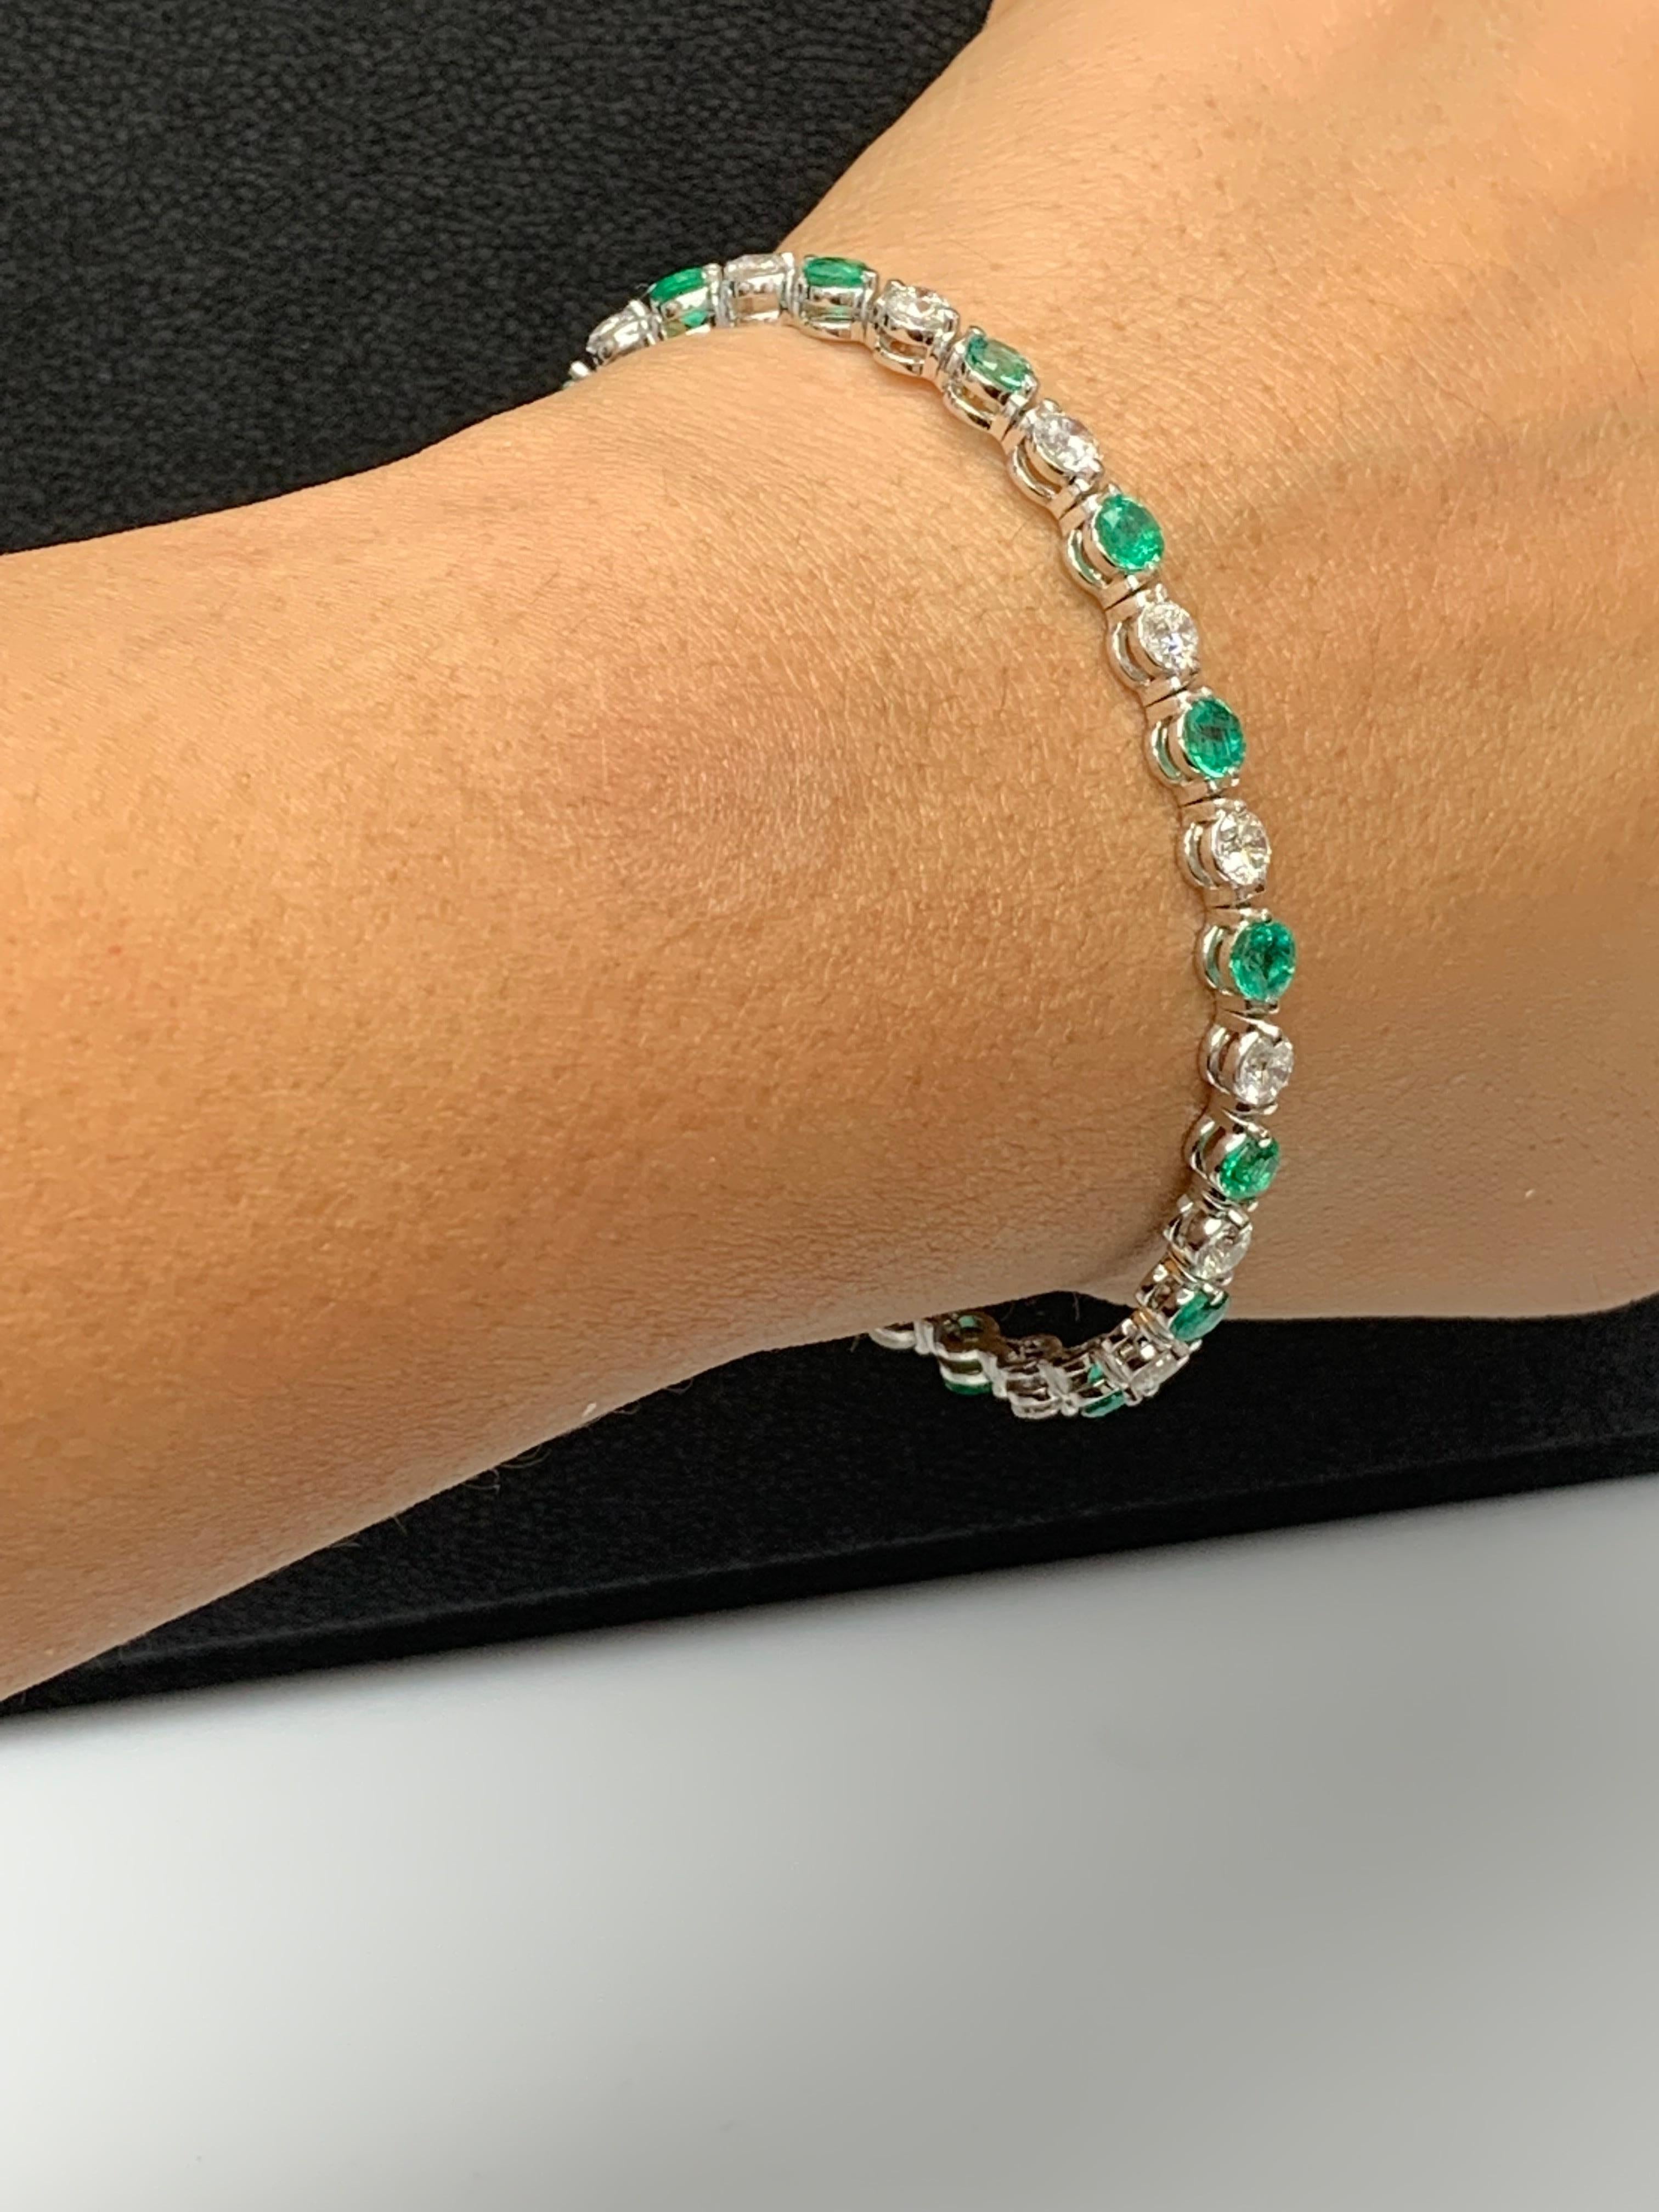 Women's or Men's 4.07 Carat Round Emerald and Diamond Bracelet in 14K White Gold For Sale